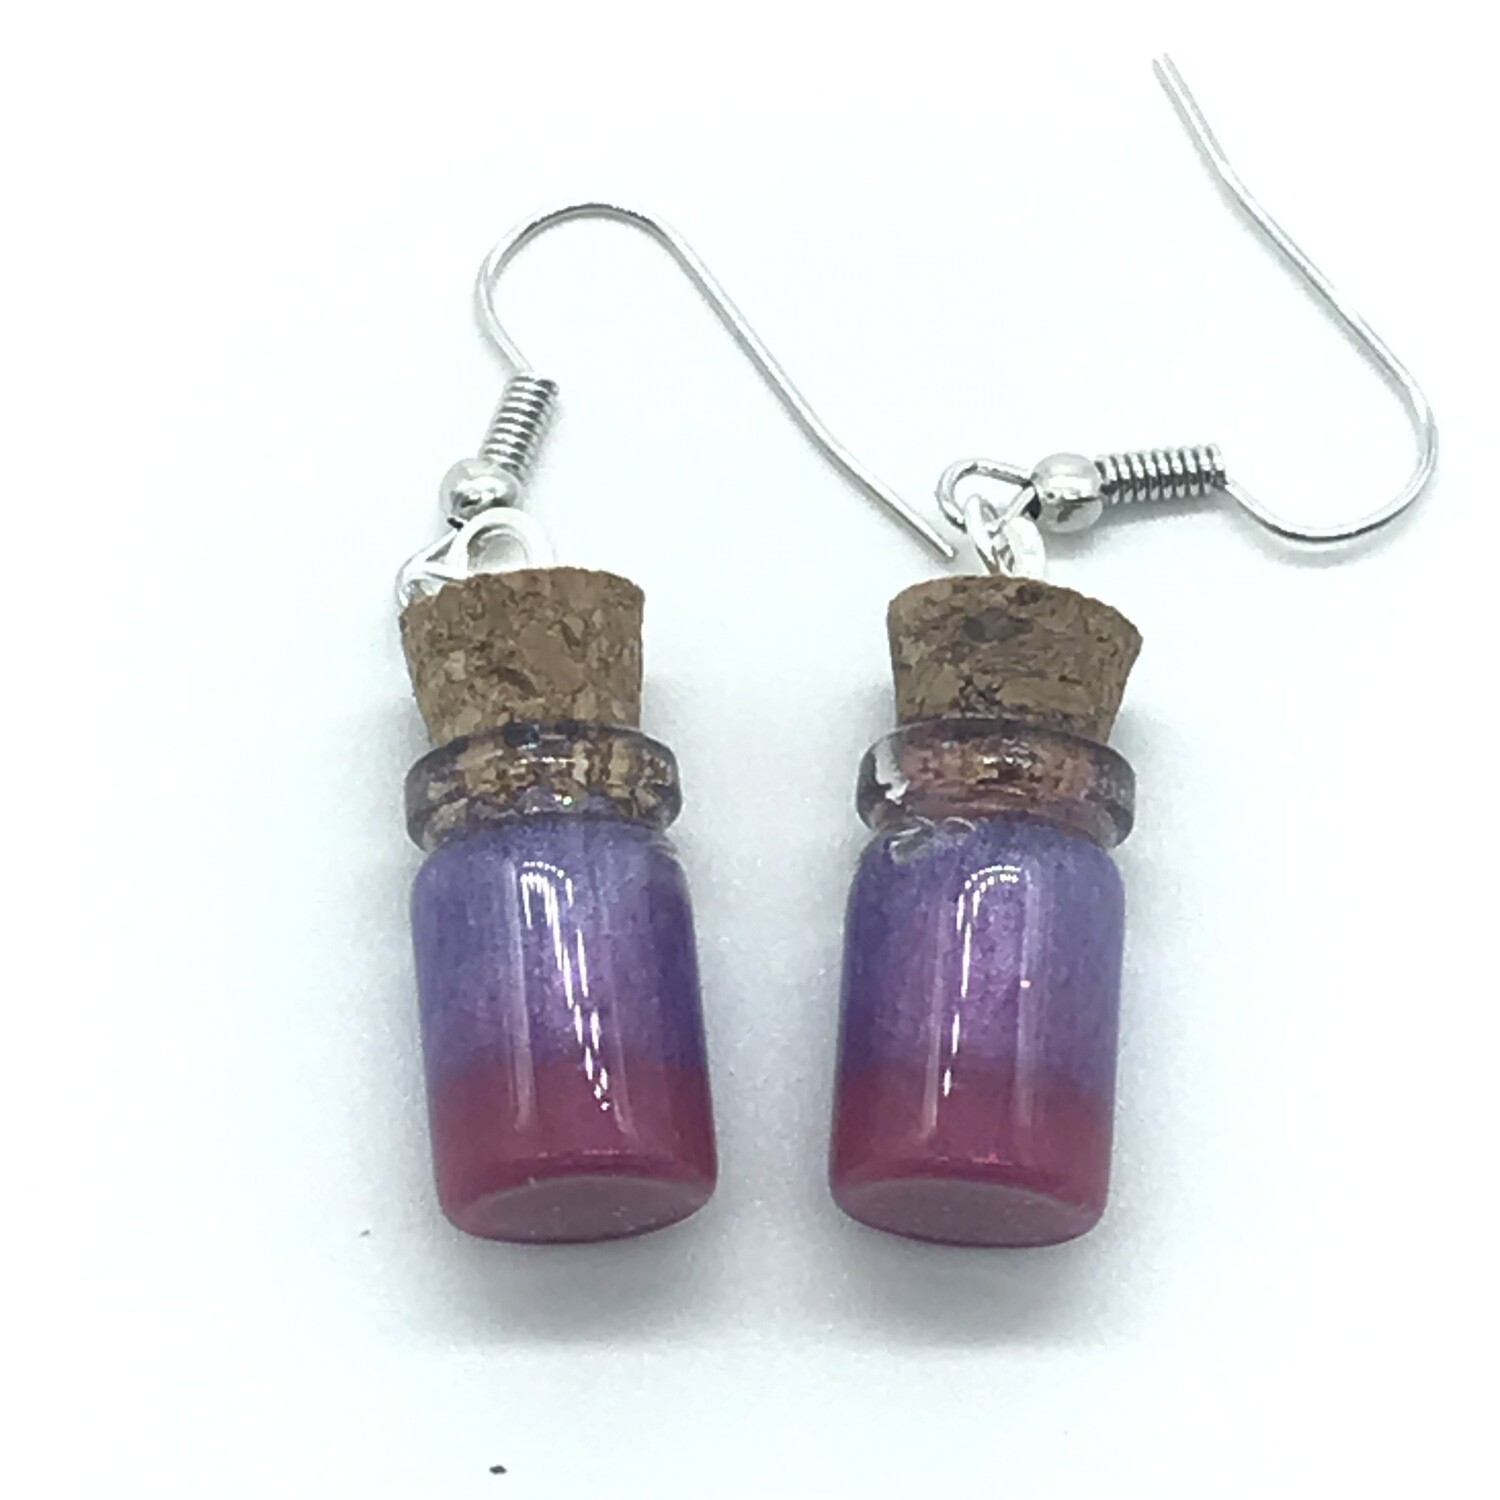 Potion Earrings - Fuchsia and lavender, short cylinder bottle